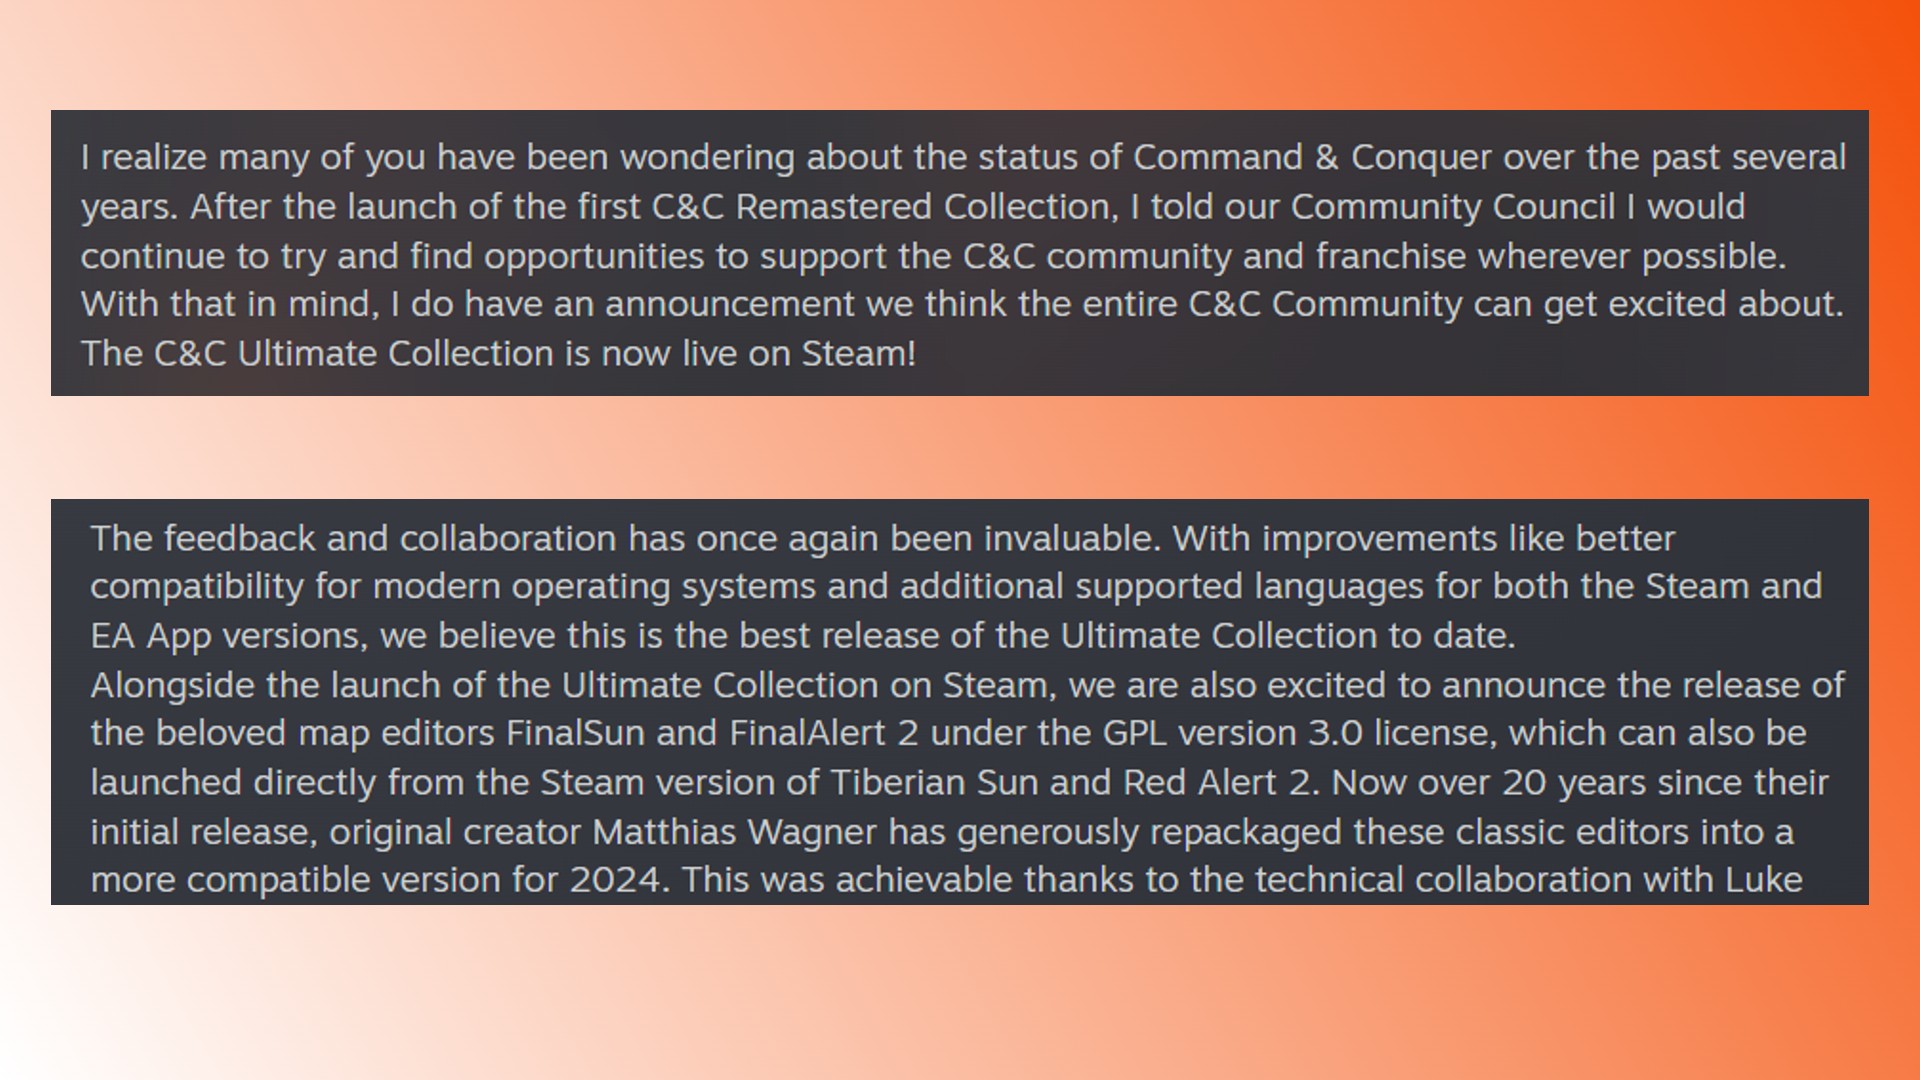 New Command and Conquer Remastered Collection: A statement from EA about RTS game series Command and Conquer